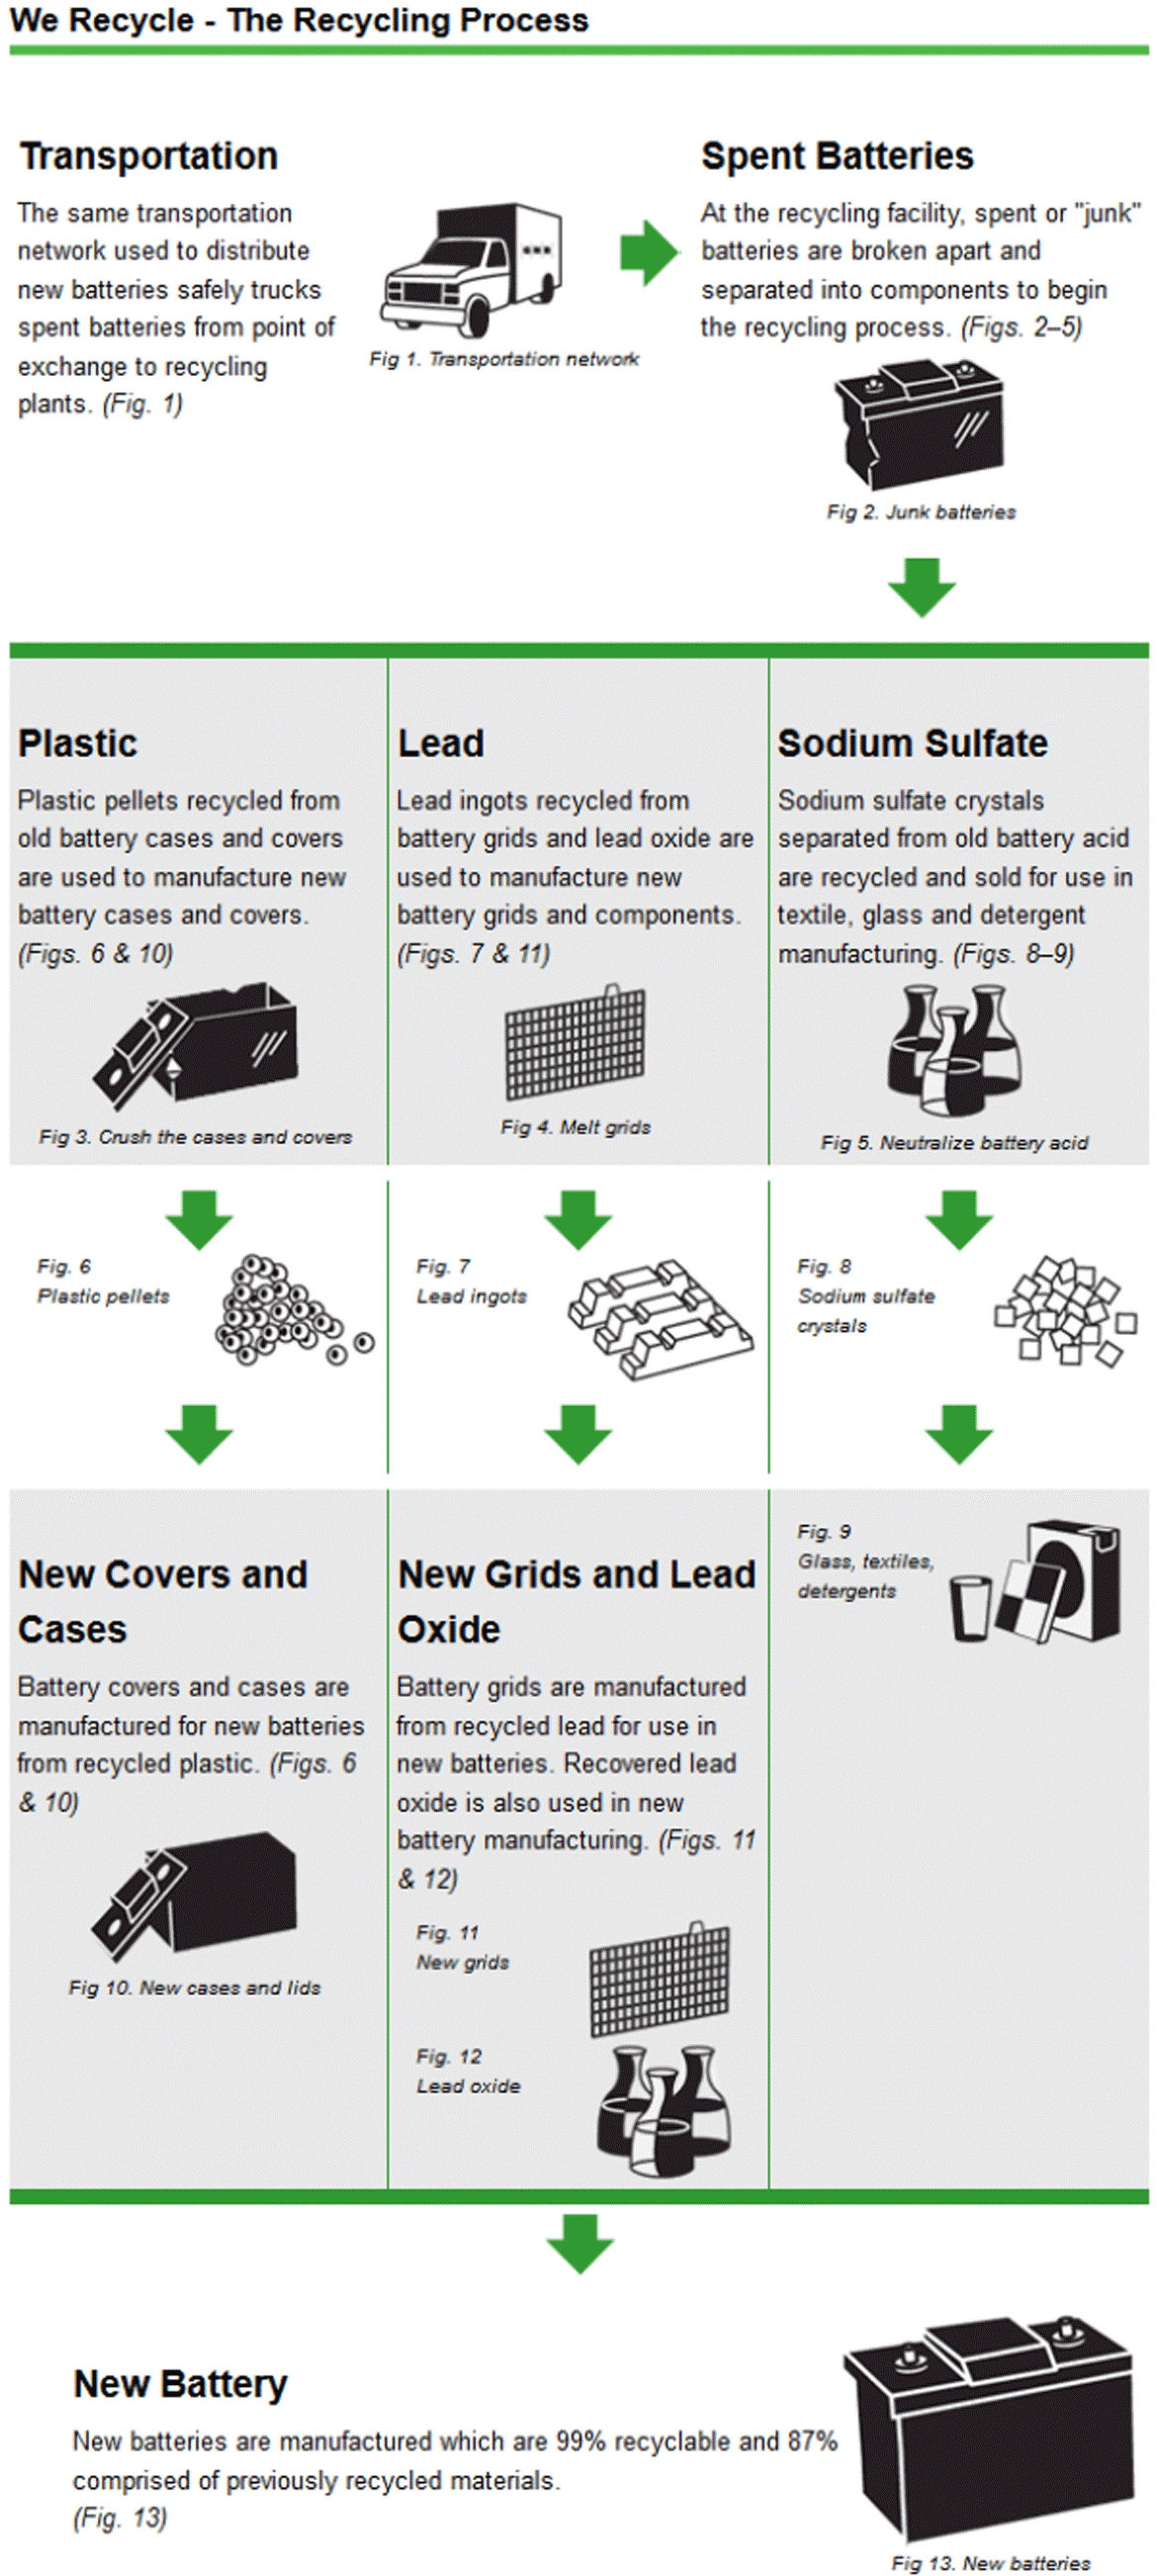 the recycling process; Transportation of spent batteries, they are separated into plastic, lead, sodium sulfate, each become new covers and cases or new grids and lead oxide, or glass, textiles, detergents, then creates a new battery